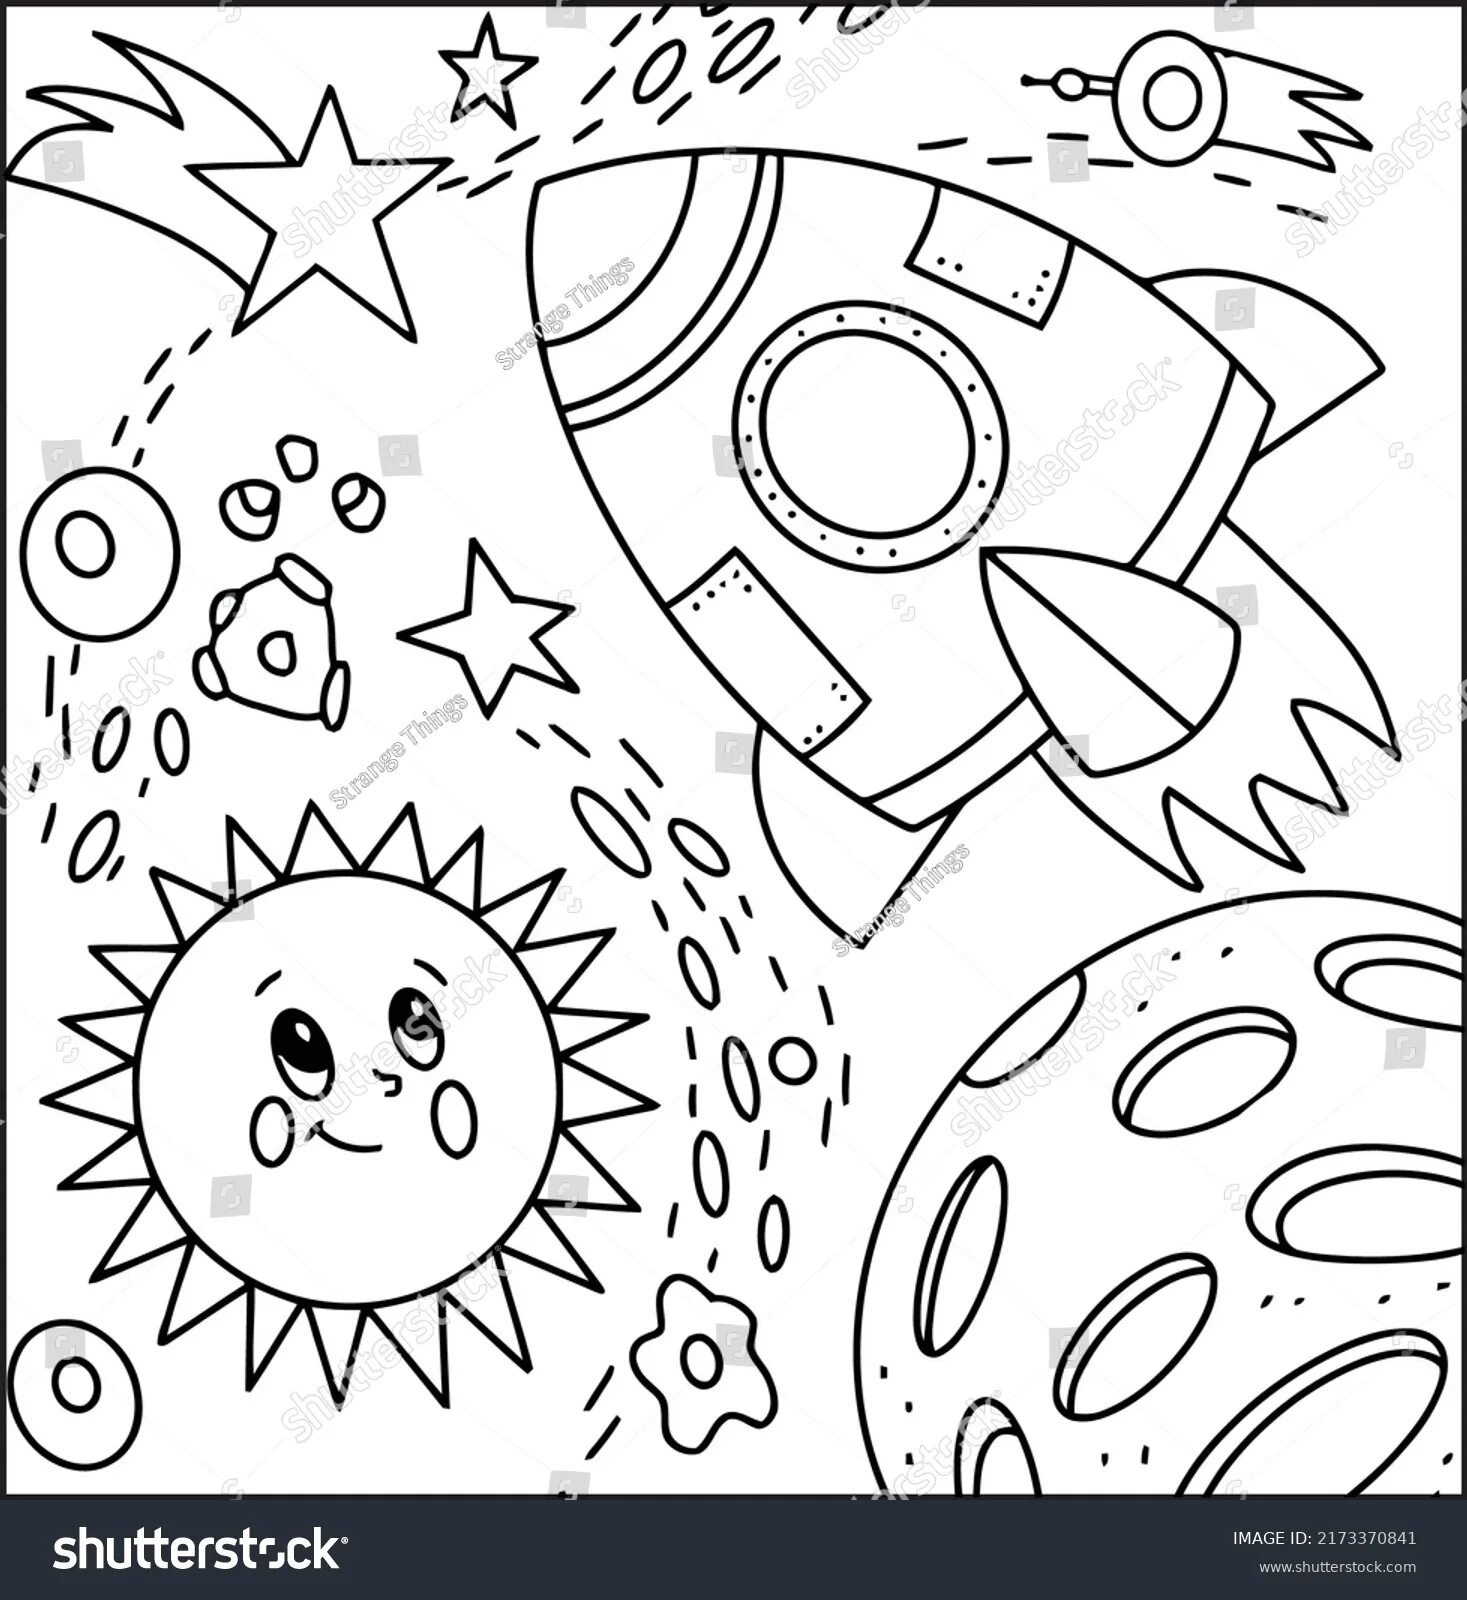 Incredible space travel coloring book for 4-5 year olds